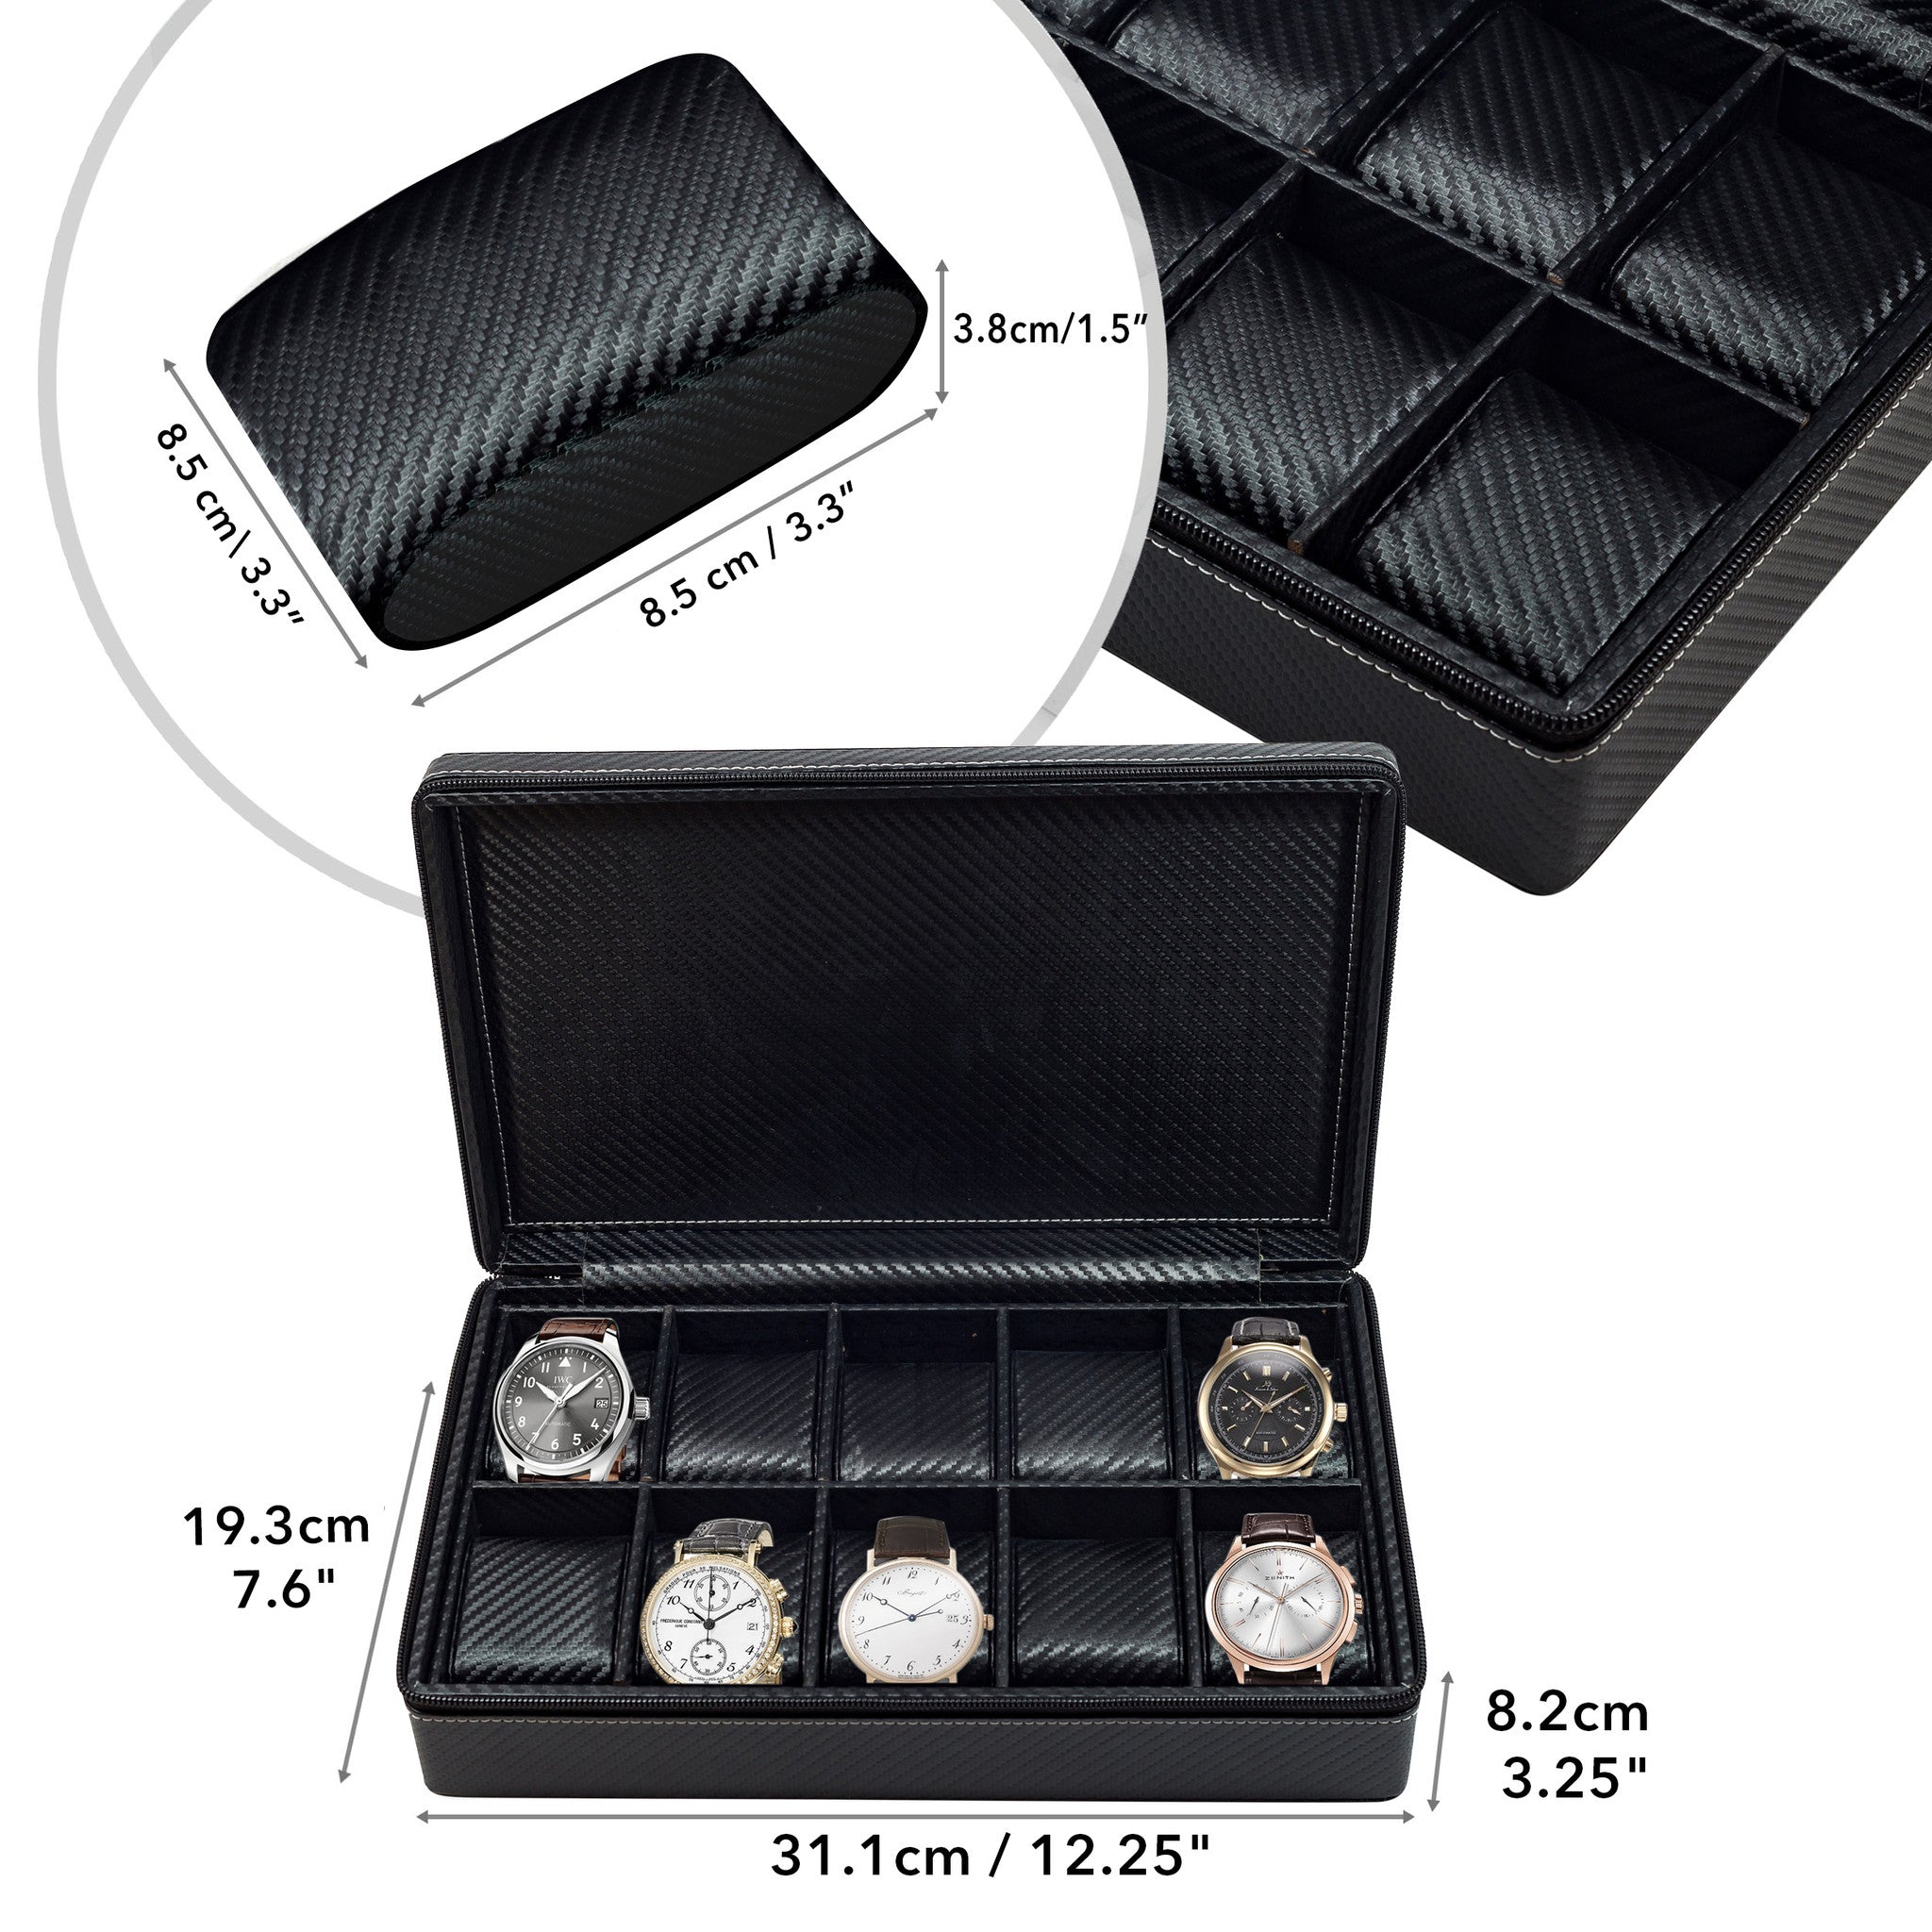 TIMELYBUYS Tie Display Case for 12 Ties, Belts, and Men's Accessories Black Carbon Fiber Storage Box